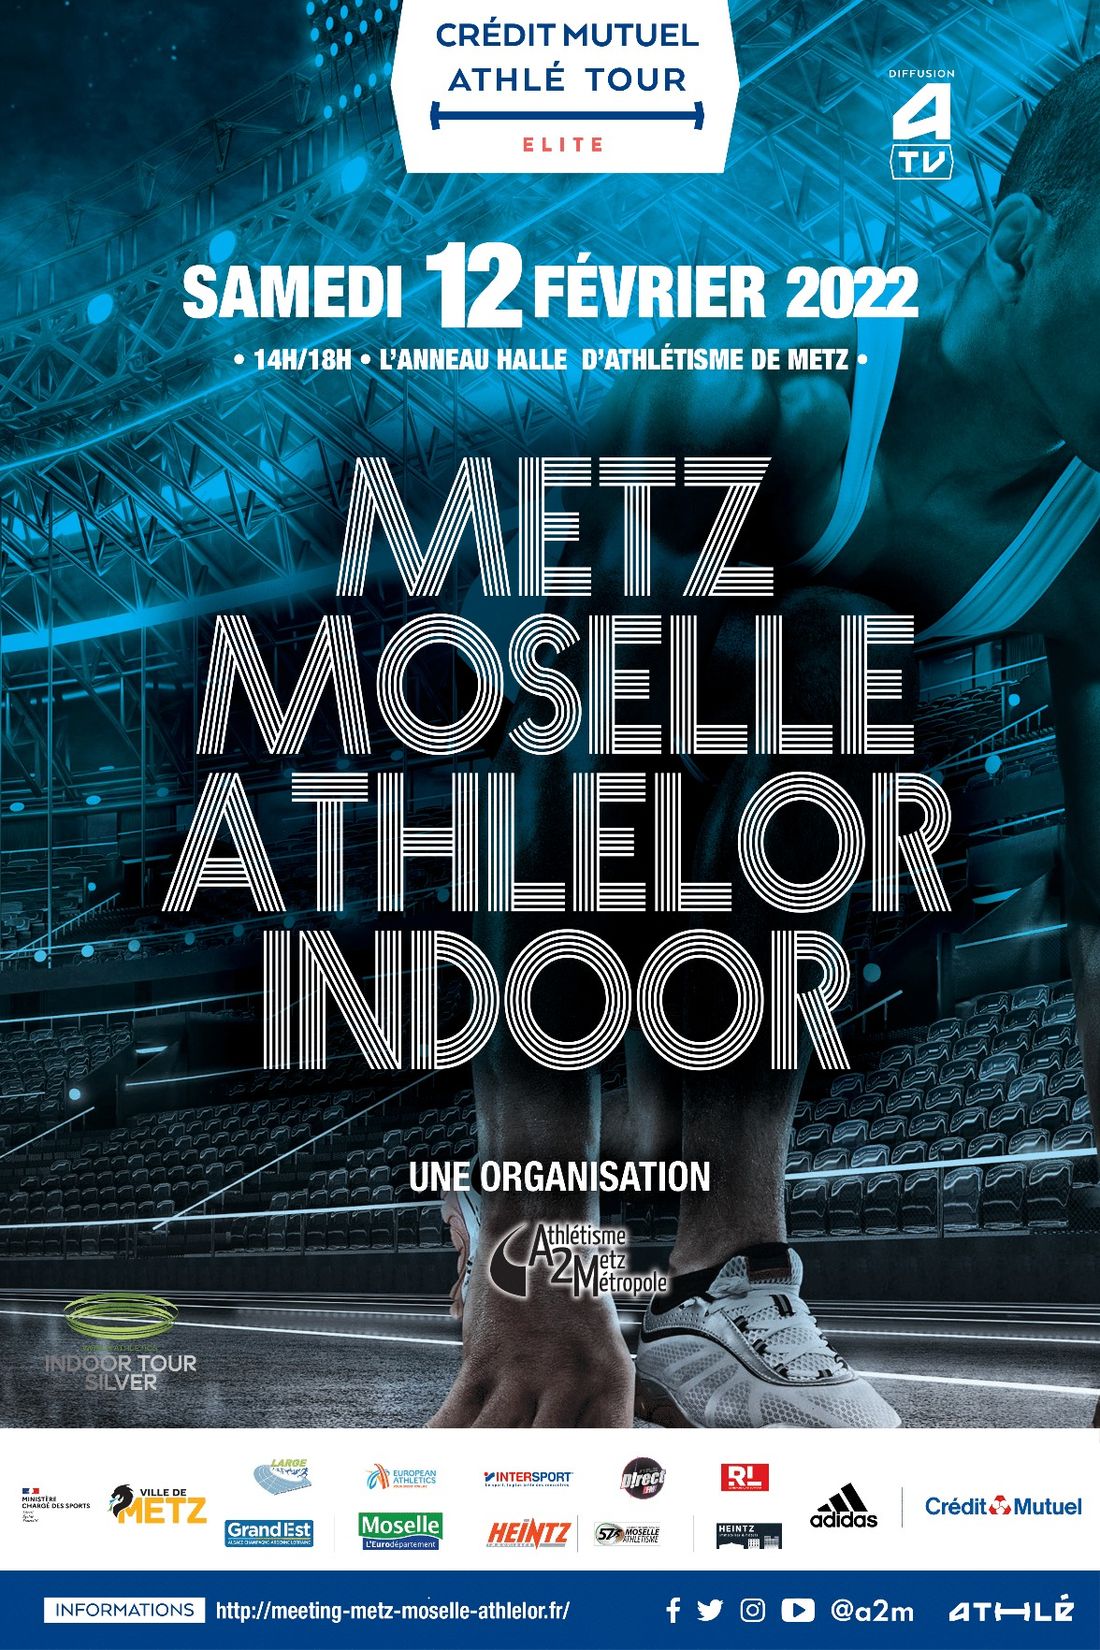 Metz Moselle Athlelor Indoor